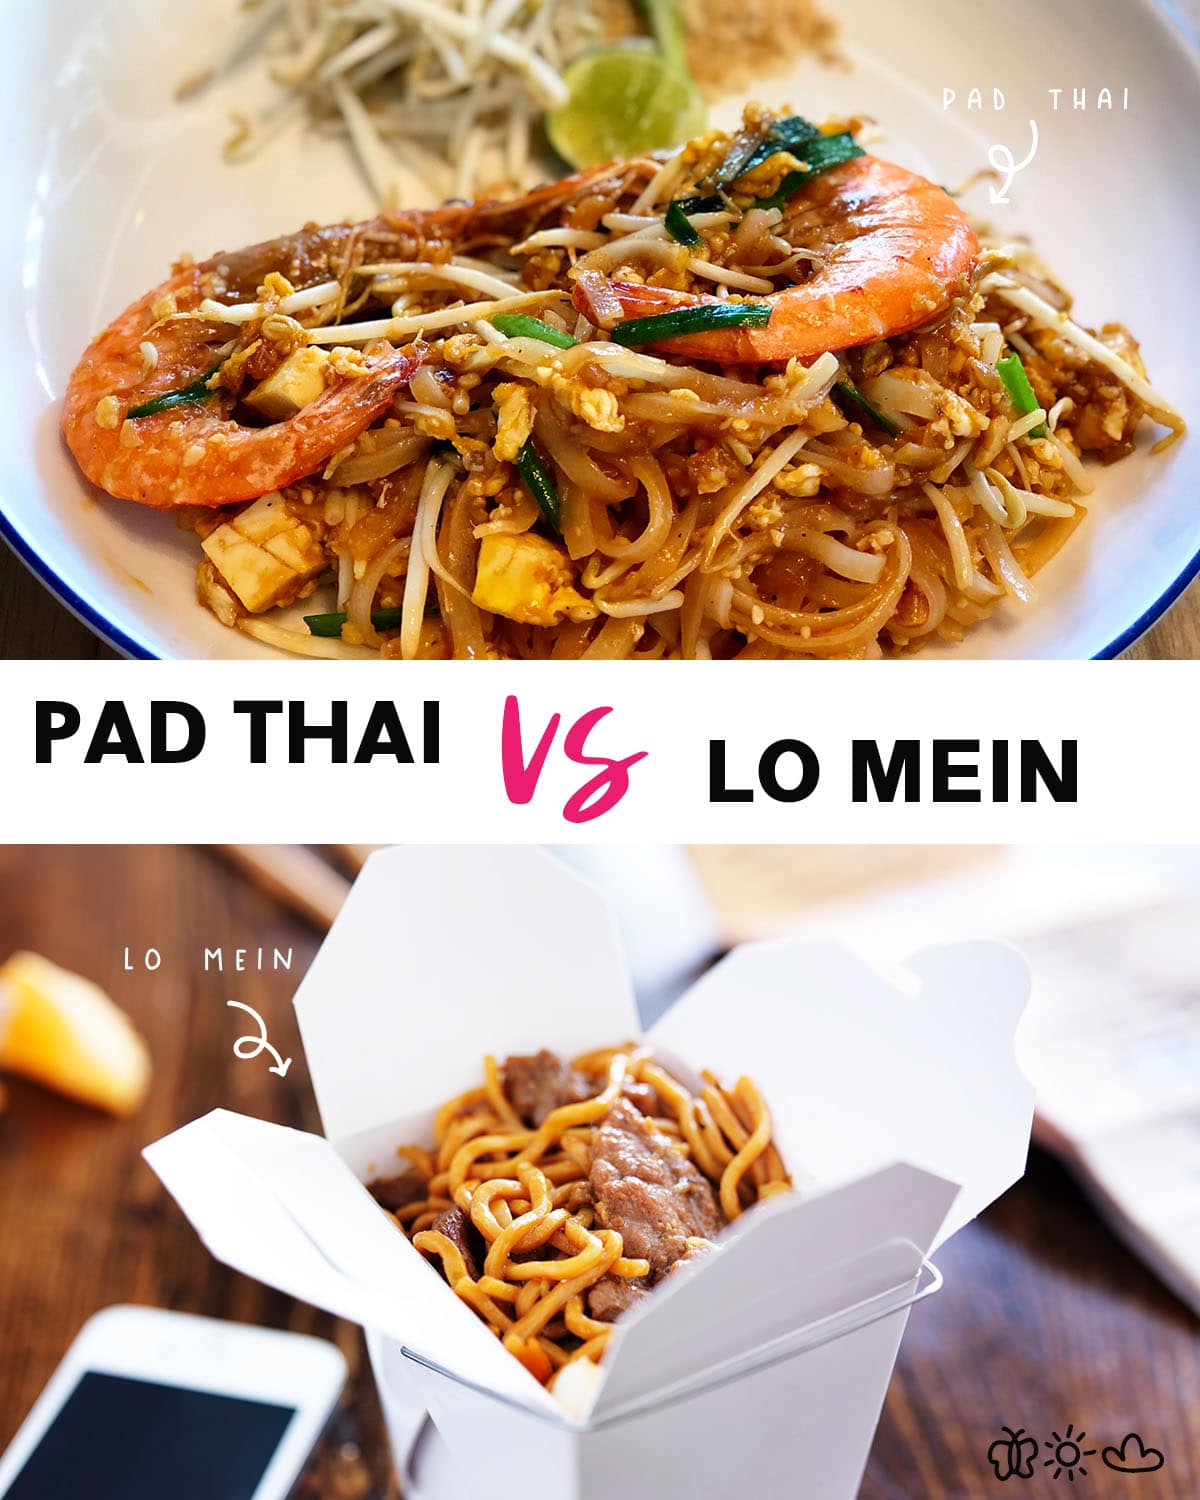 Which do you prefer: Pad Thai vs Lo Mein? It’s a tough question, isn’t it? They both seem so delicious. But which is the better dish? Well, that all depends on what you’re looking for in a meal.